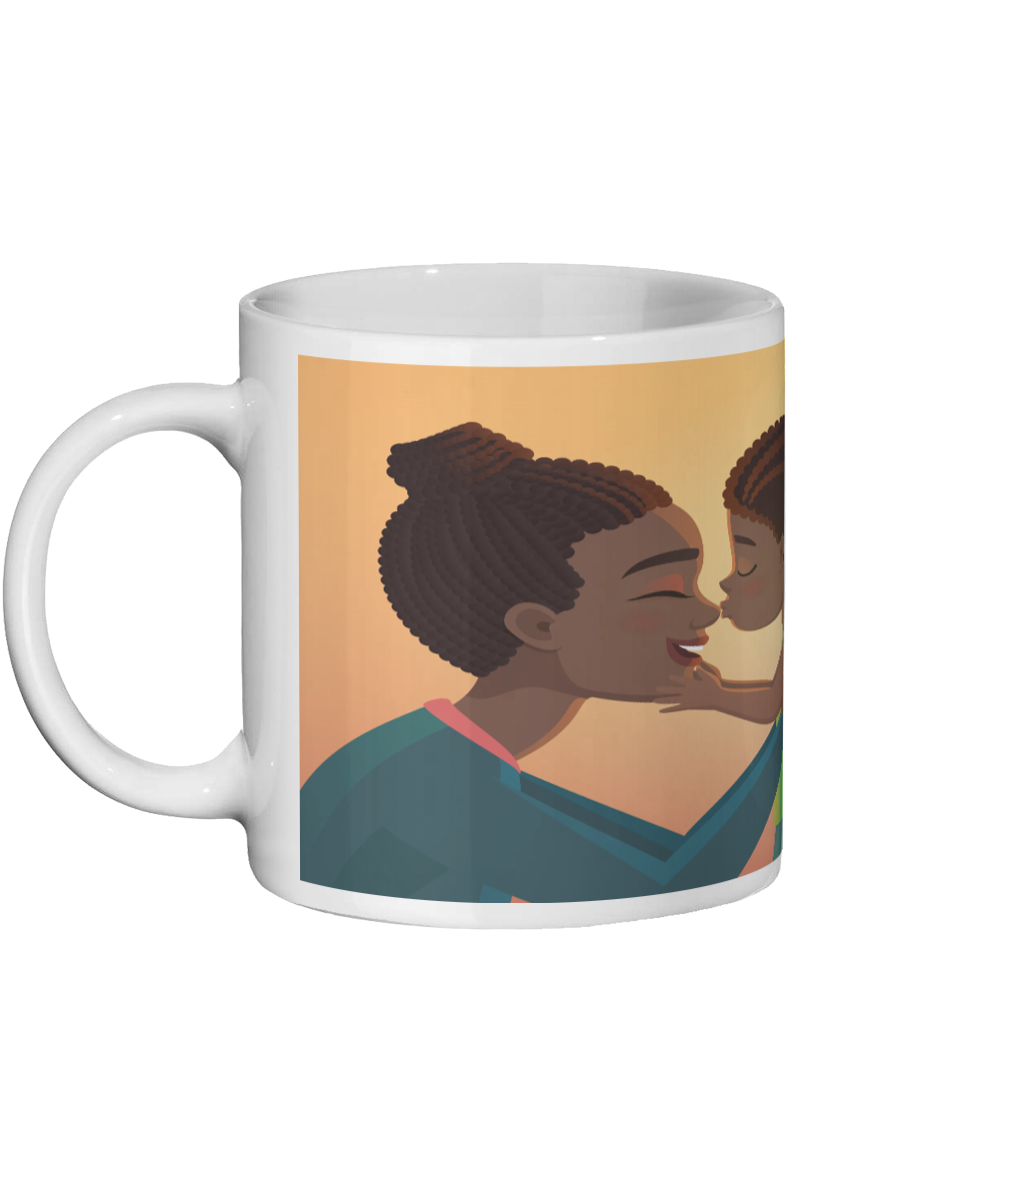 A Mother and Son's Love Ceramic Mug - FAST UK DELIVERY